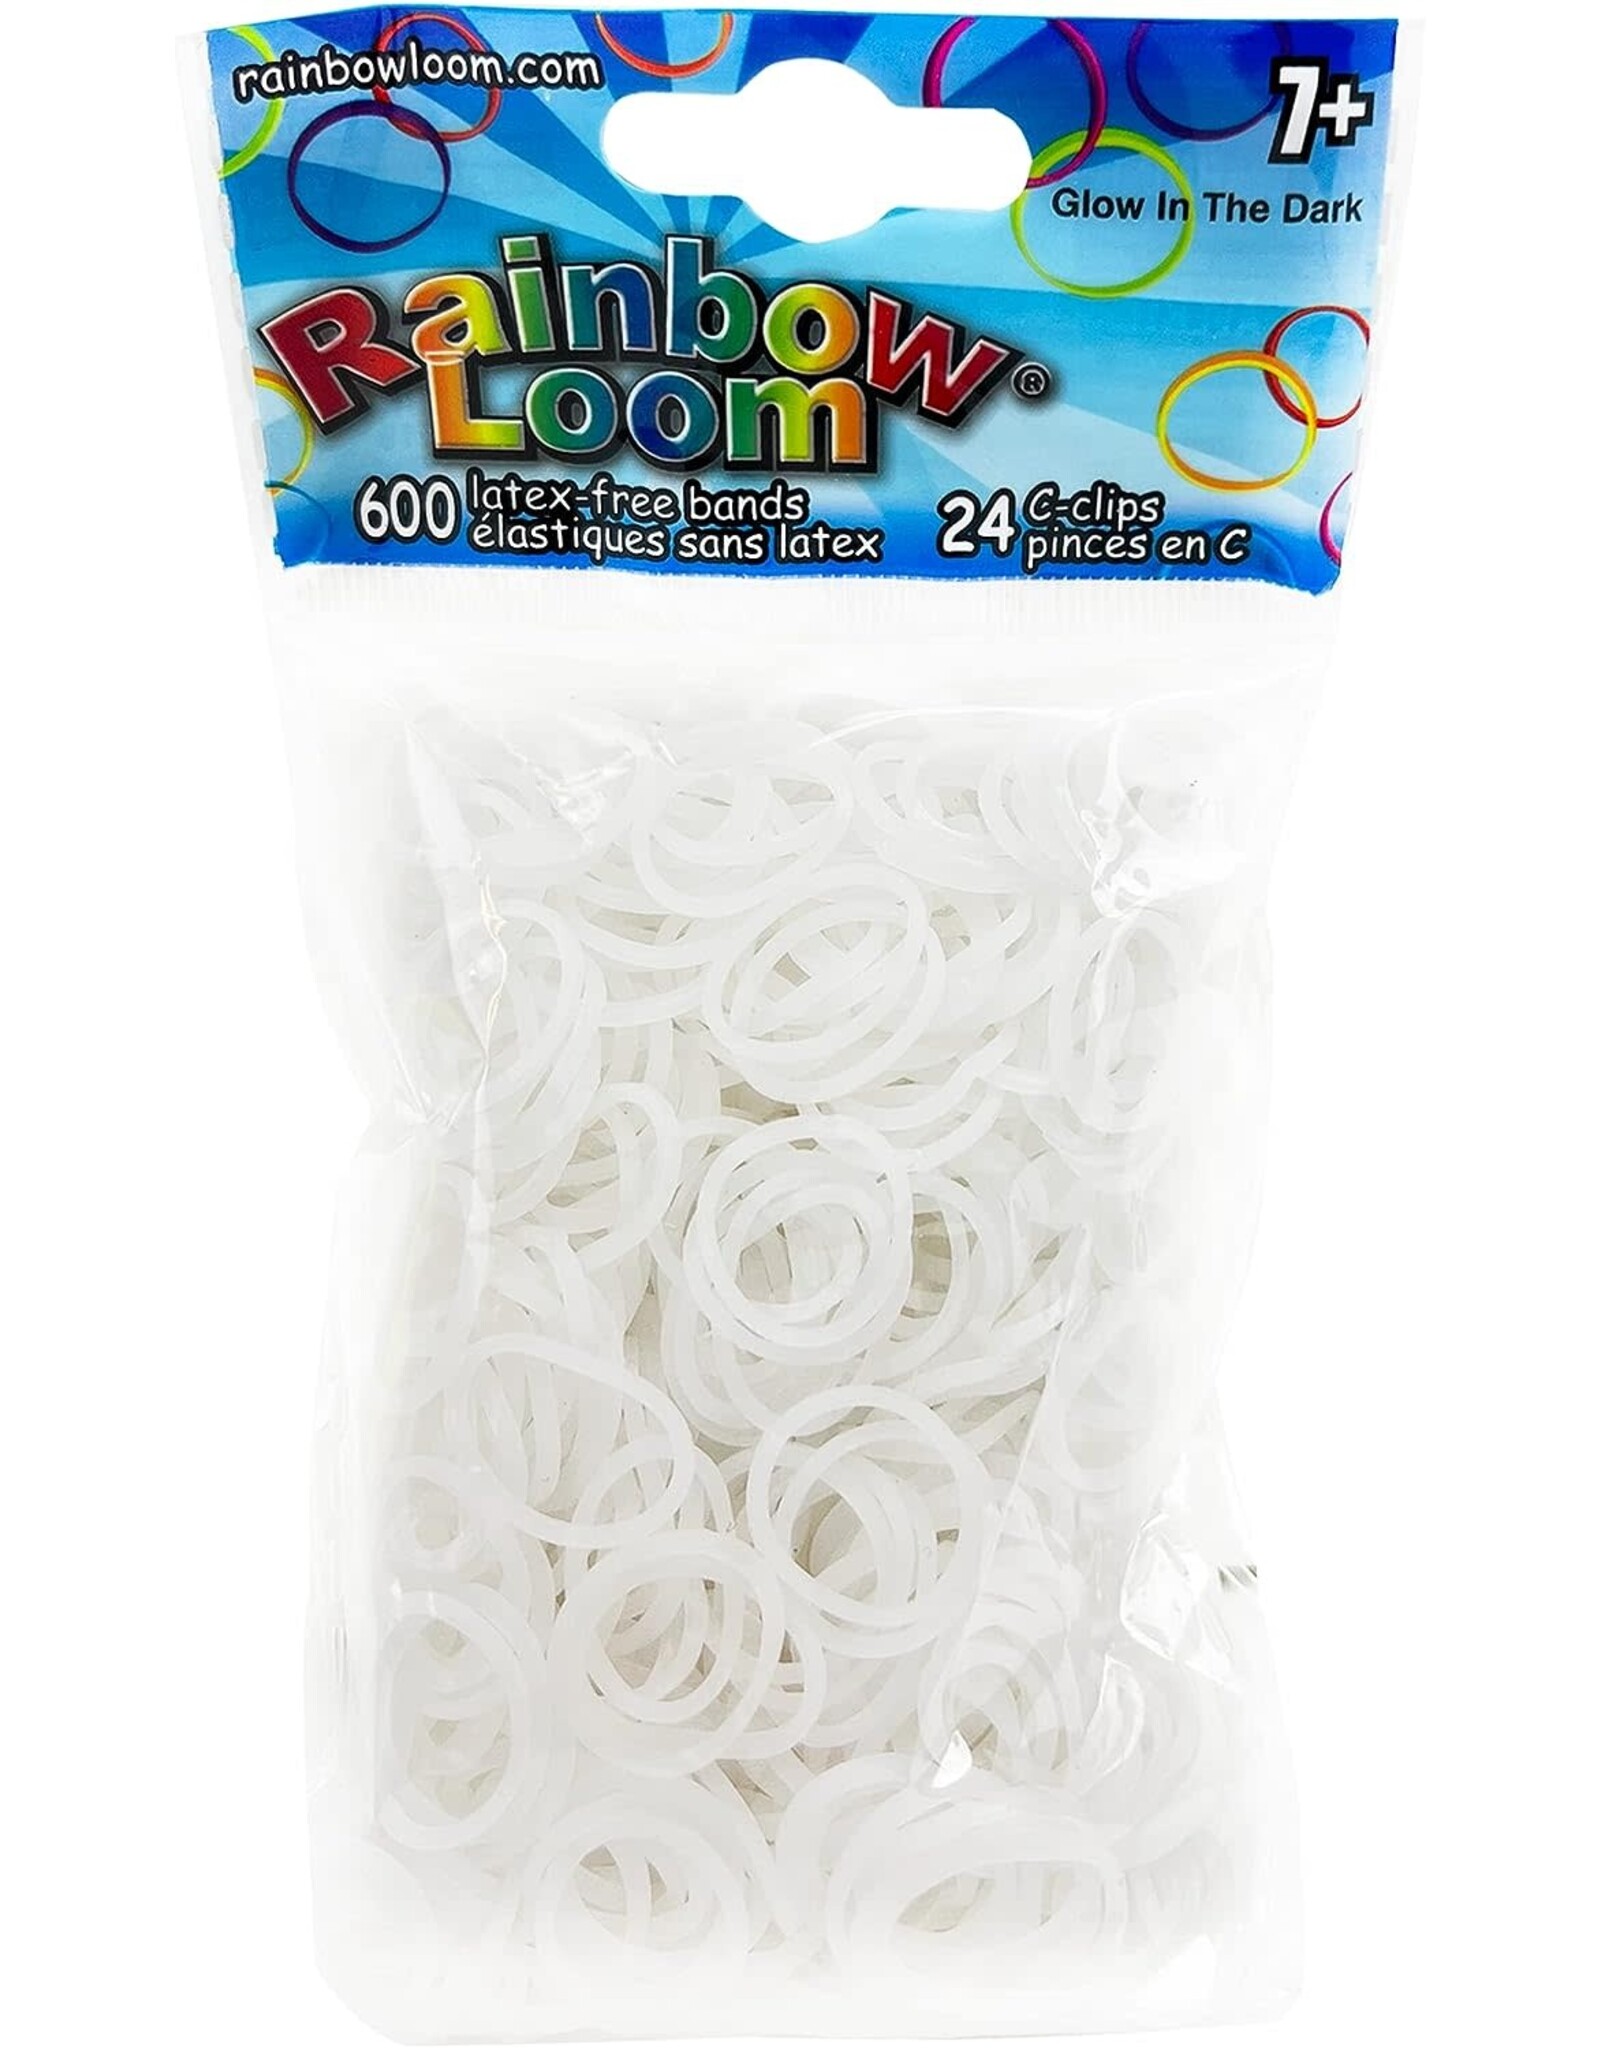 Rainbow Loom Refill Bands: Solid Glow in the Dark